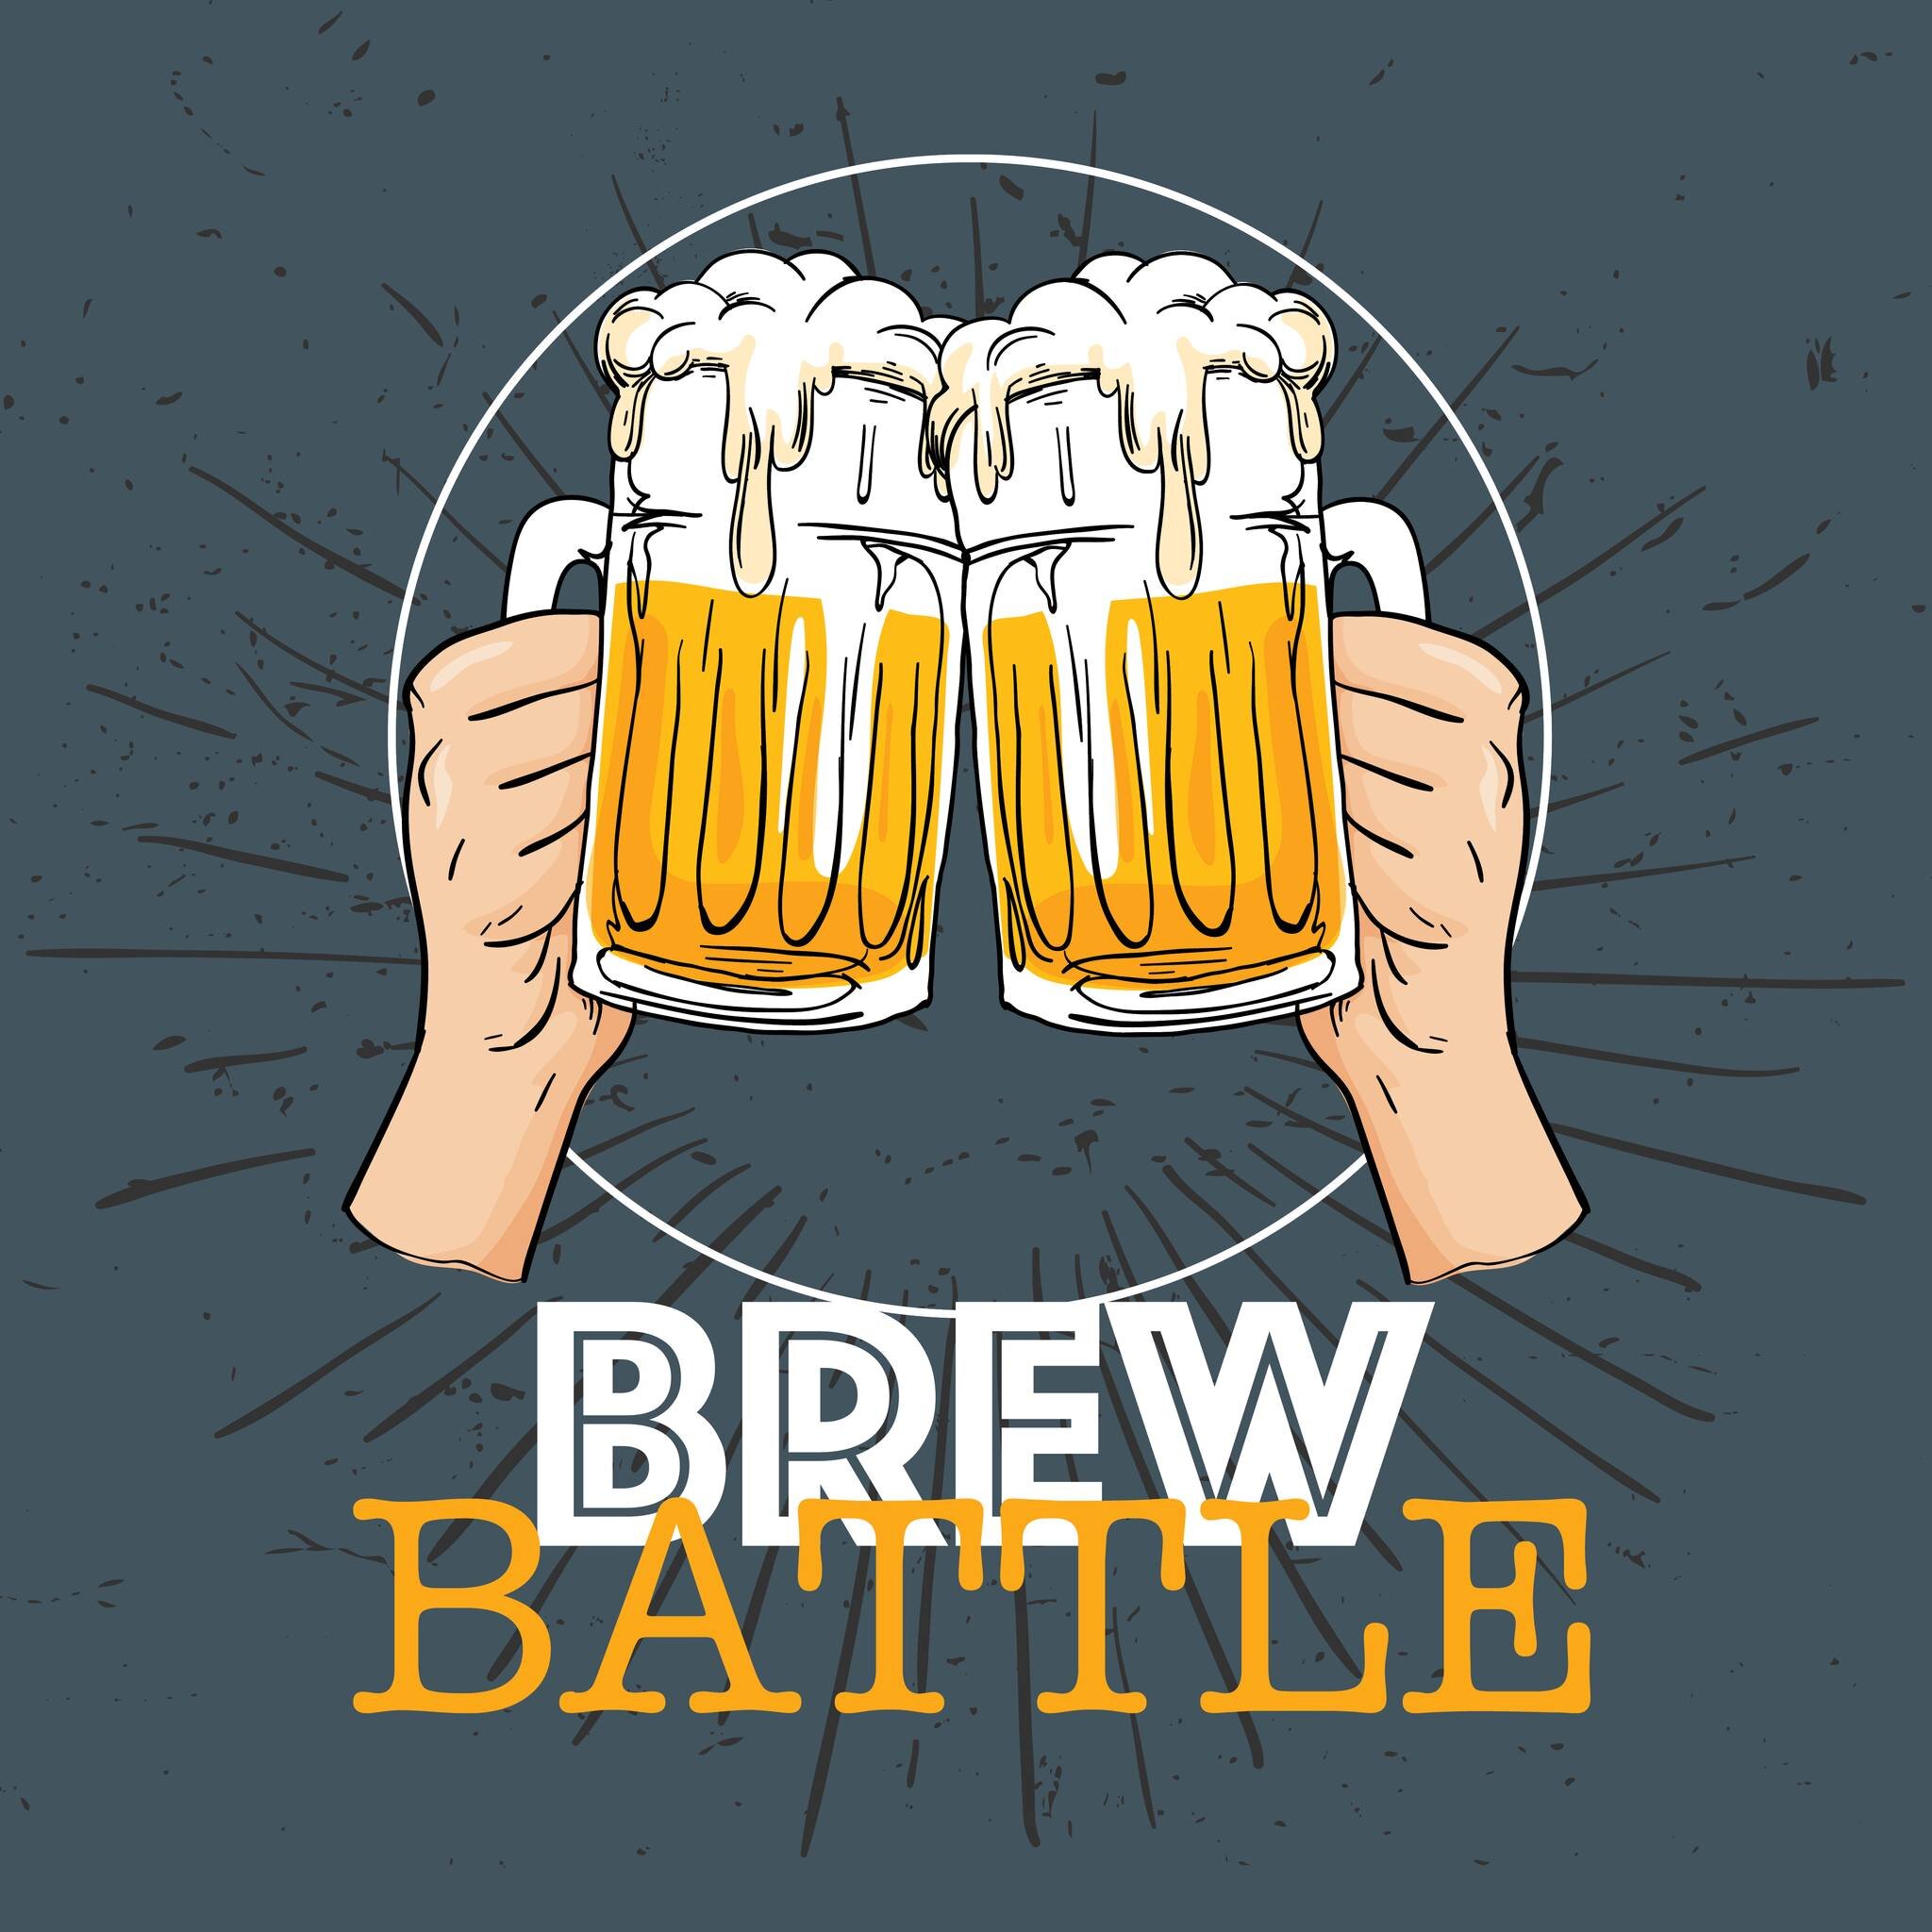 Wyoming Brewers Festival presents 
WBF Brew Battle: A Homebrew Competition 
-
For more details visit https://www.wyobrewfest.com/home-brew-comp
-
-
#beerlover 
#homebrewer 
#wyobrewfest